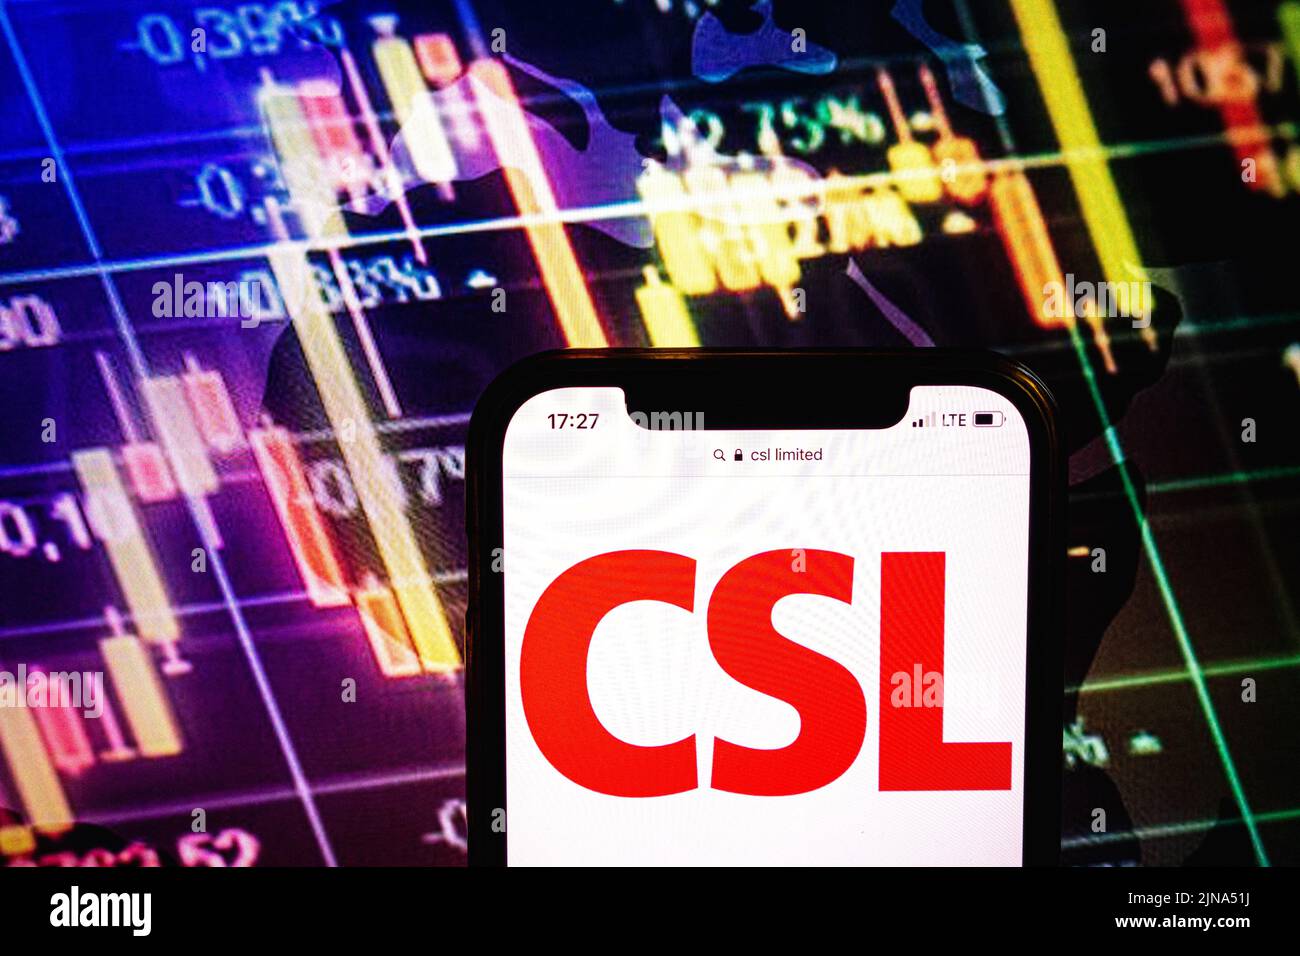 KONSKIE, POLAND - August 09, 2022: Smartphone displaying logo of CSL Limited company on stock exchange diagram background Stock Photo